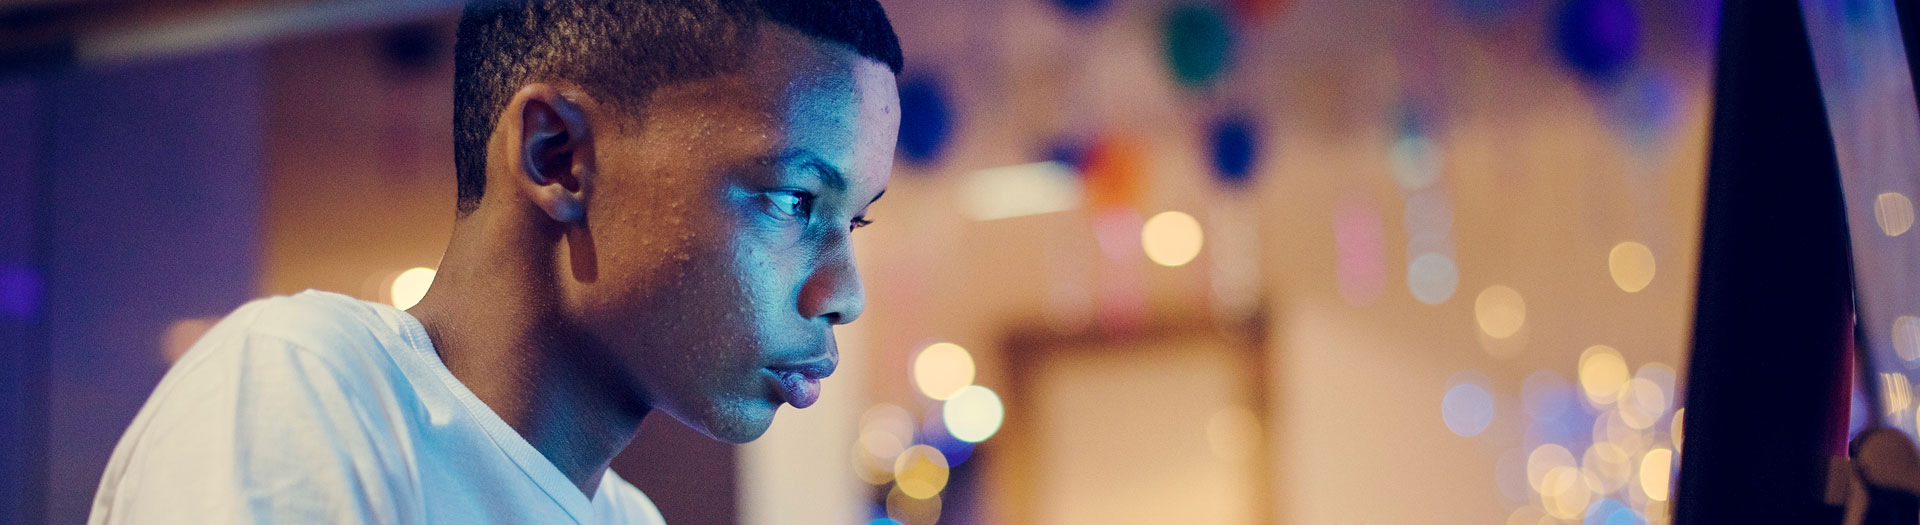 A young man in profile, wearing a white t-shirt, looks intently at something off-camera. The background is filled with soft, out-of-focus lights, suggesting an indoor or nighttime setting.